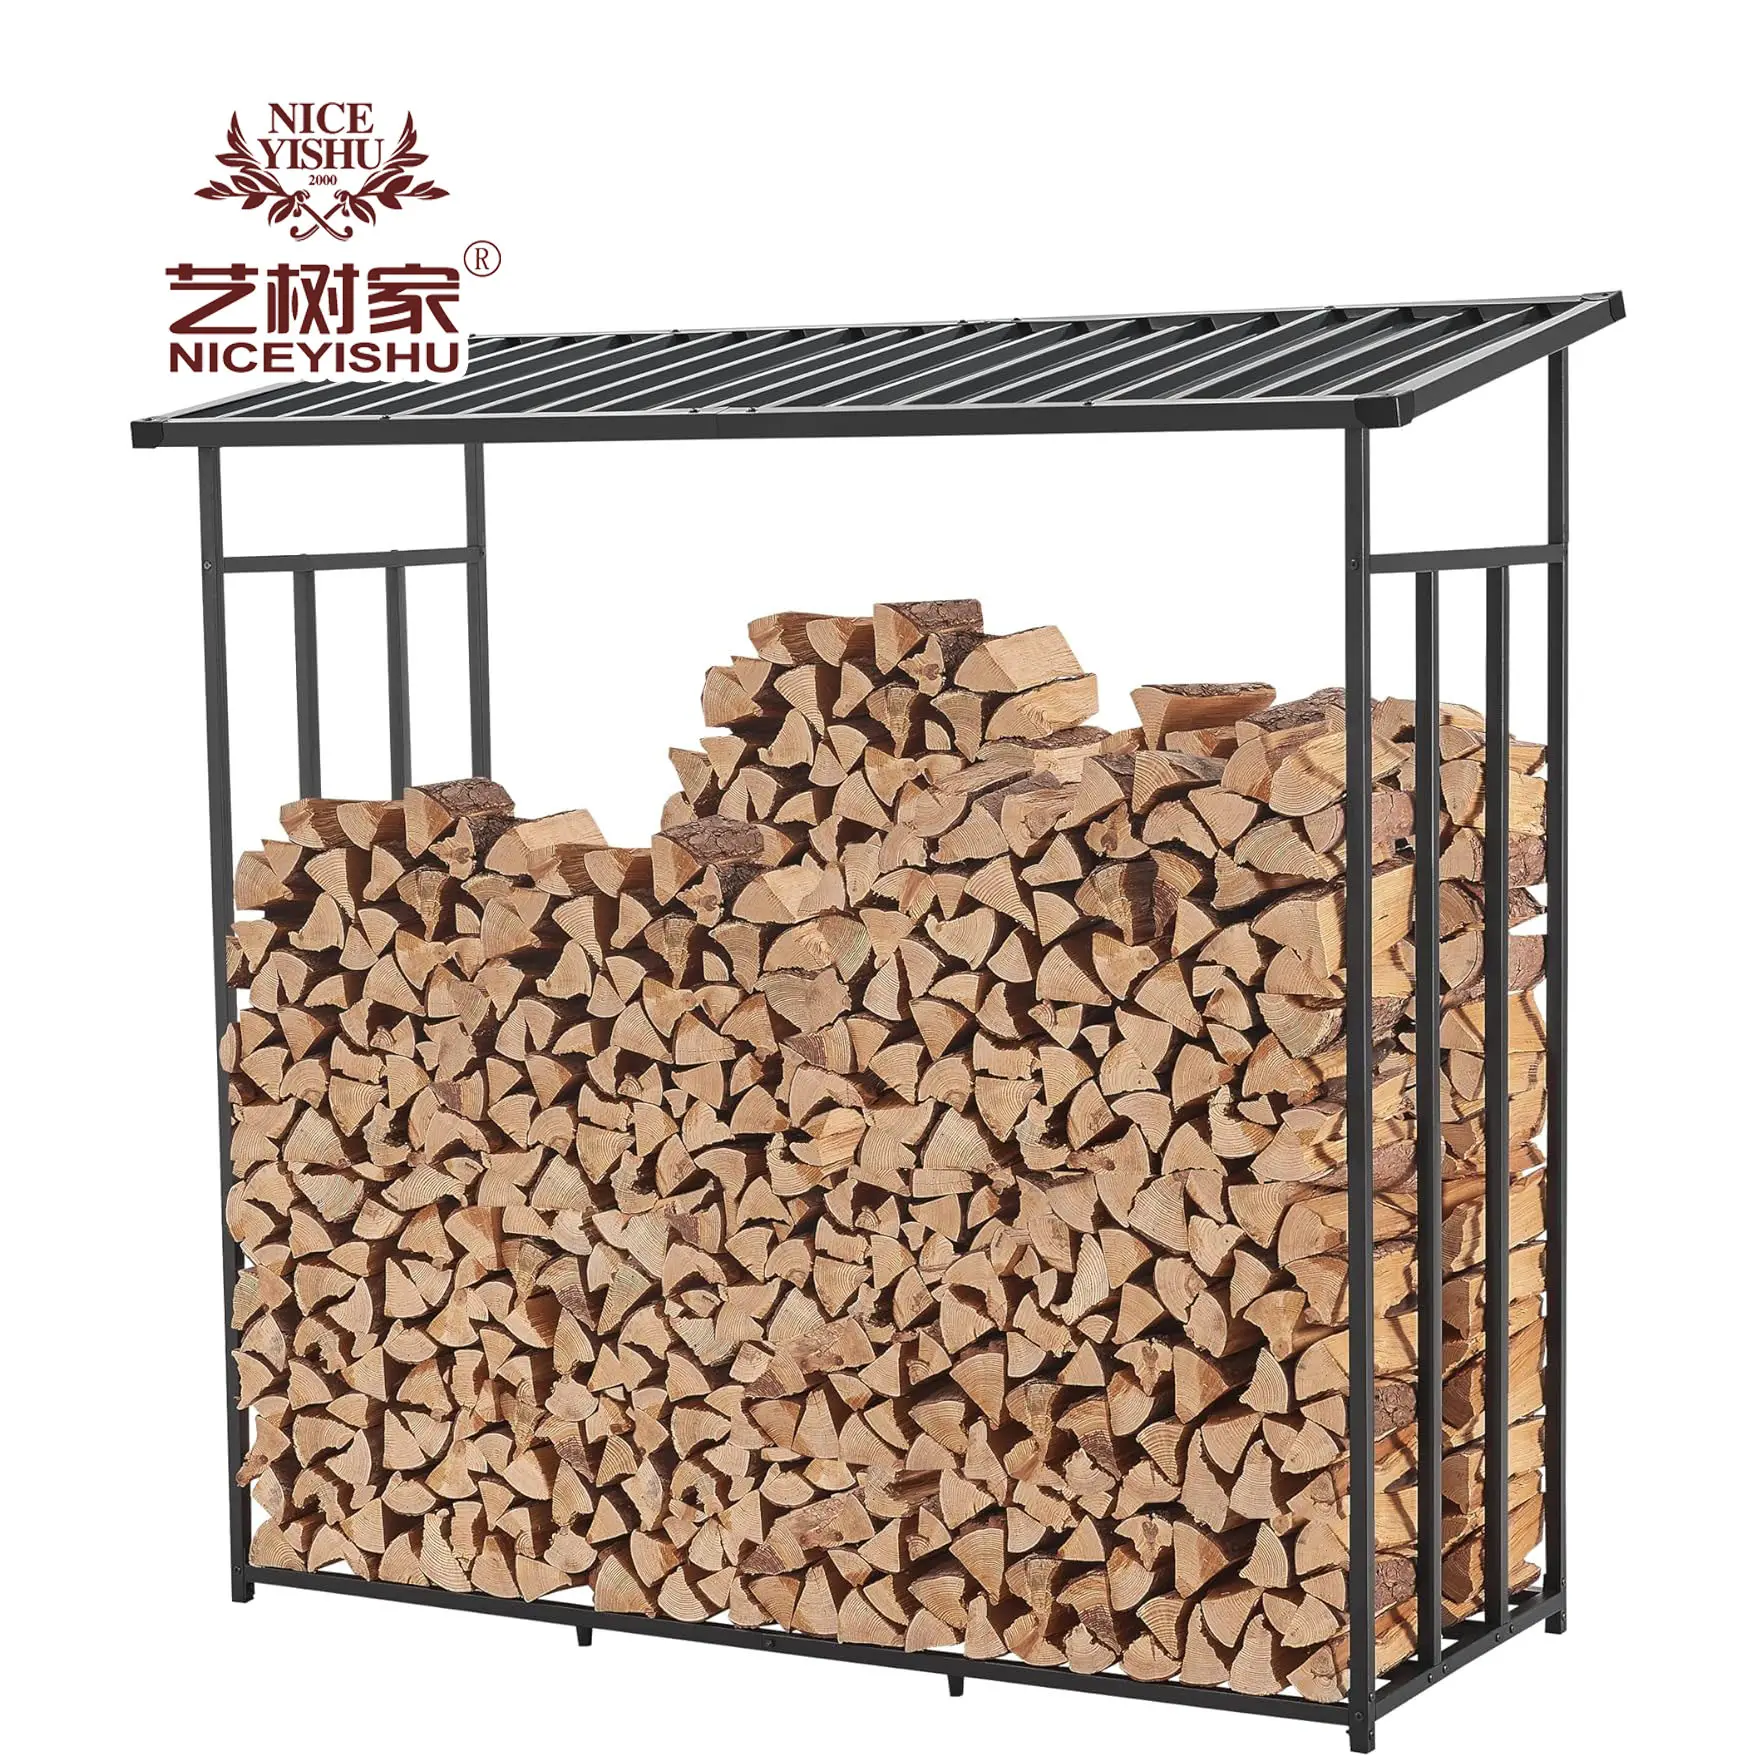 4.4ft outdoor lumber modular round garden decor firewood log rack bracket storage and holders fireplace portable met with tools